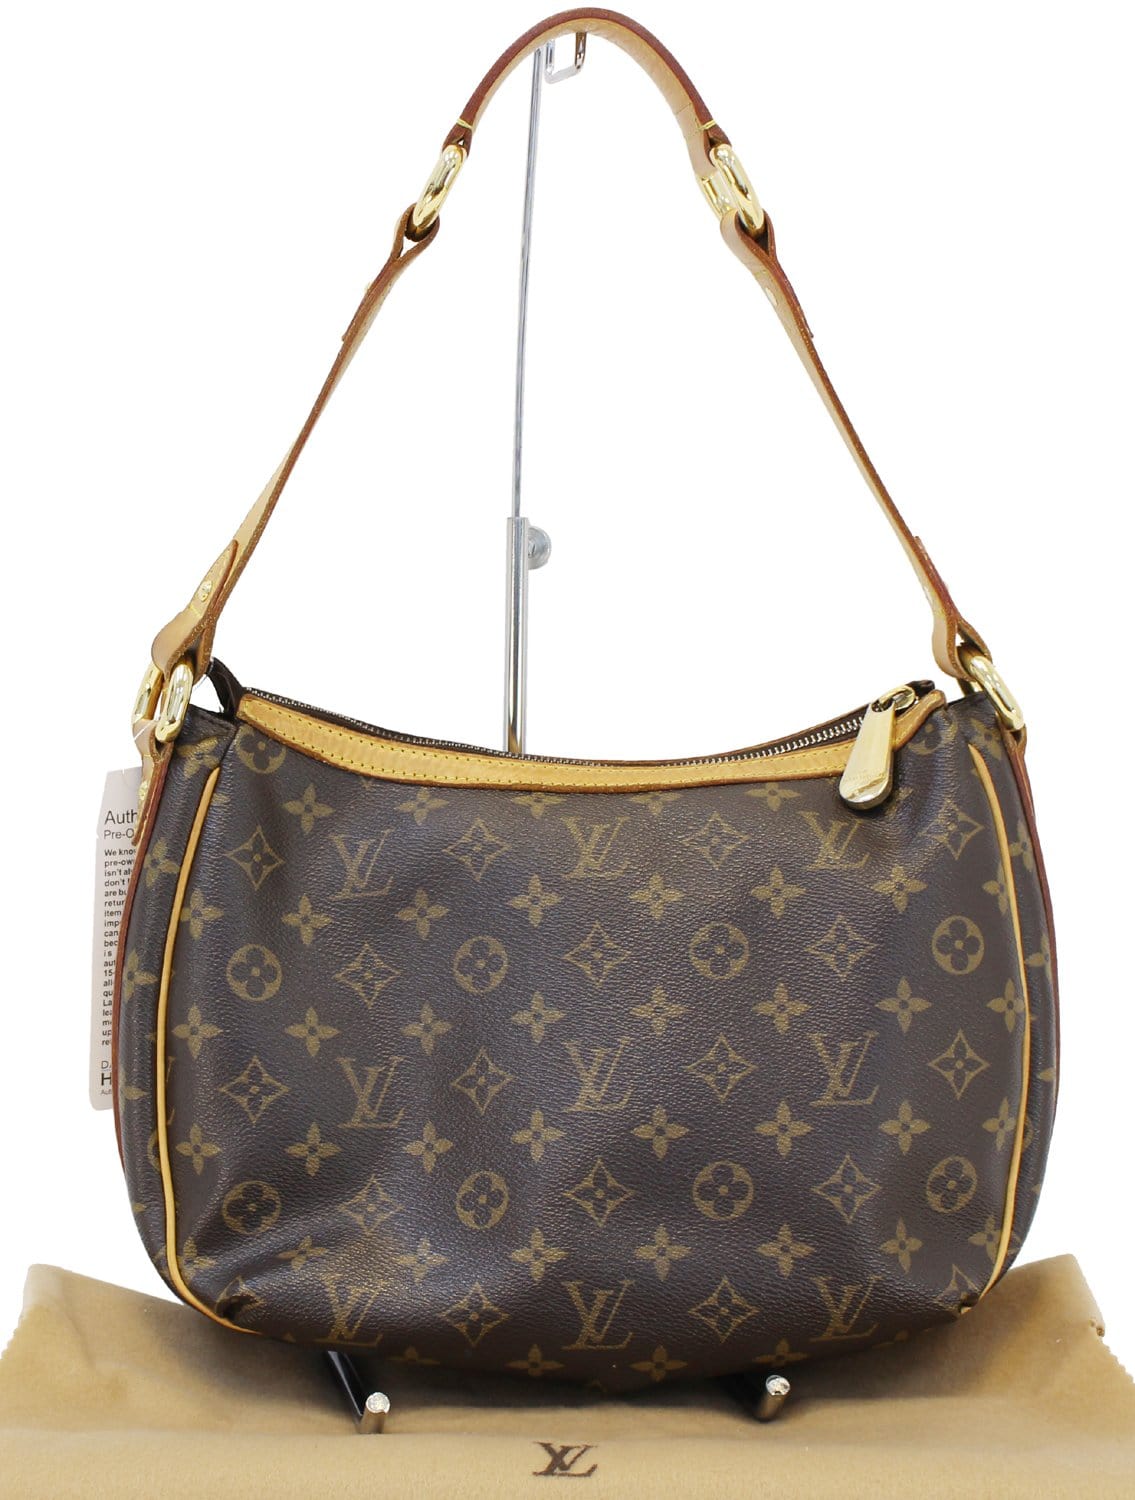 Louis Vuitton Steamer Bag Monogram PM in Taurillon Leather — BLOGGER ARMOIRE